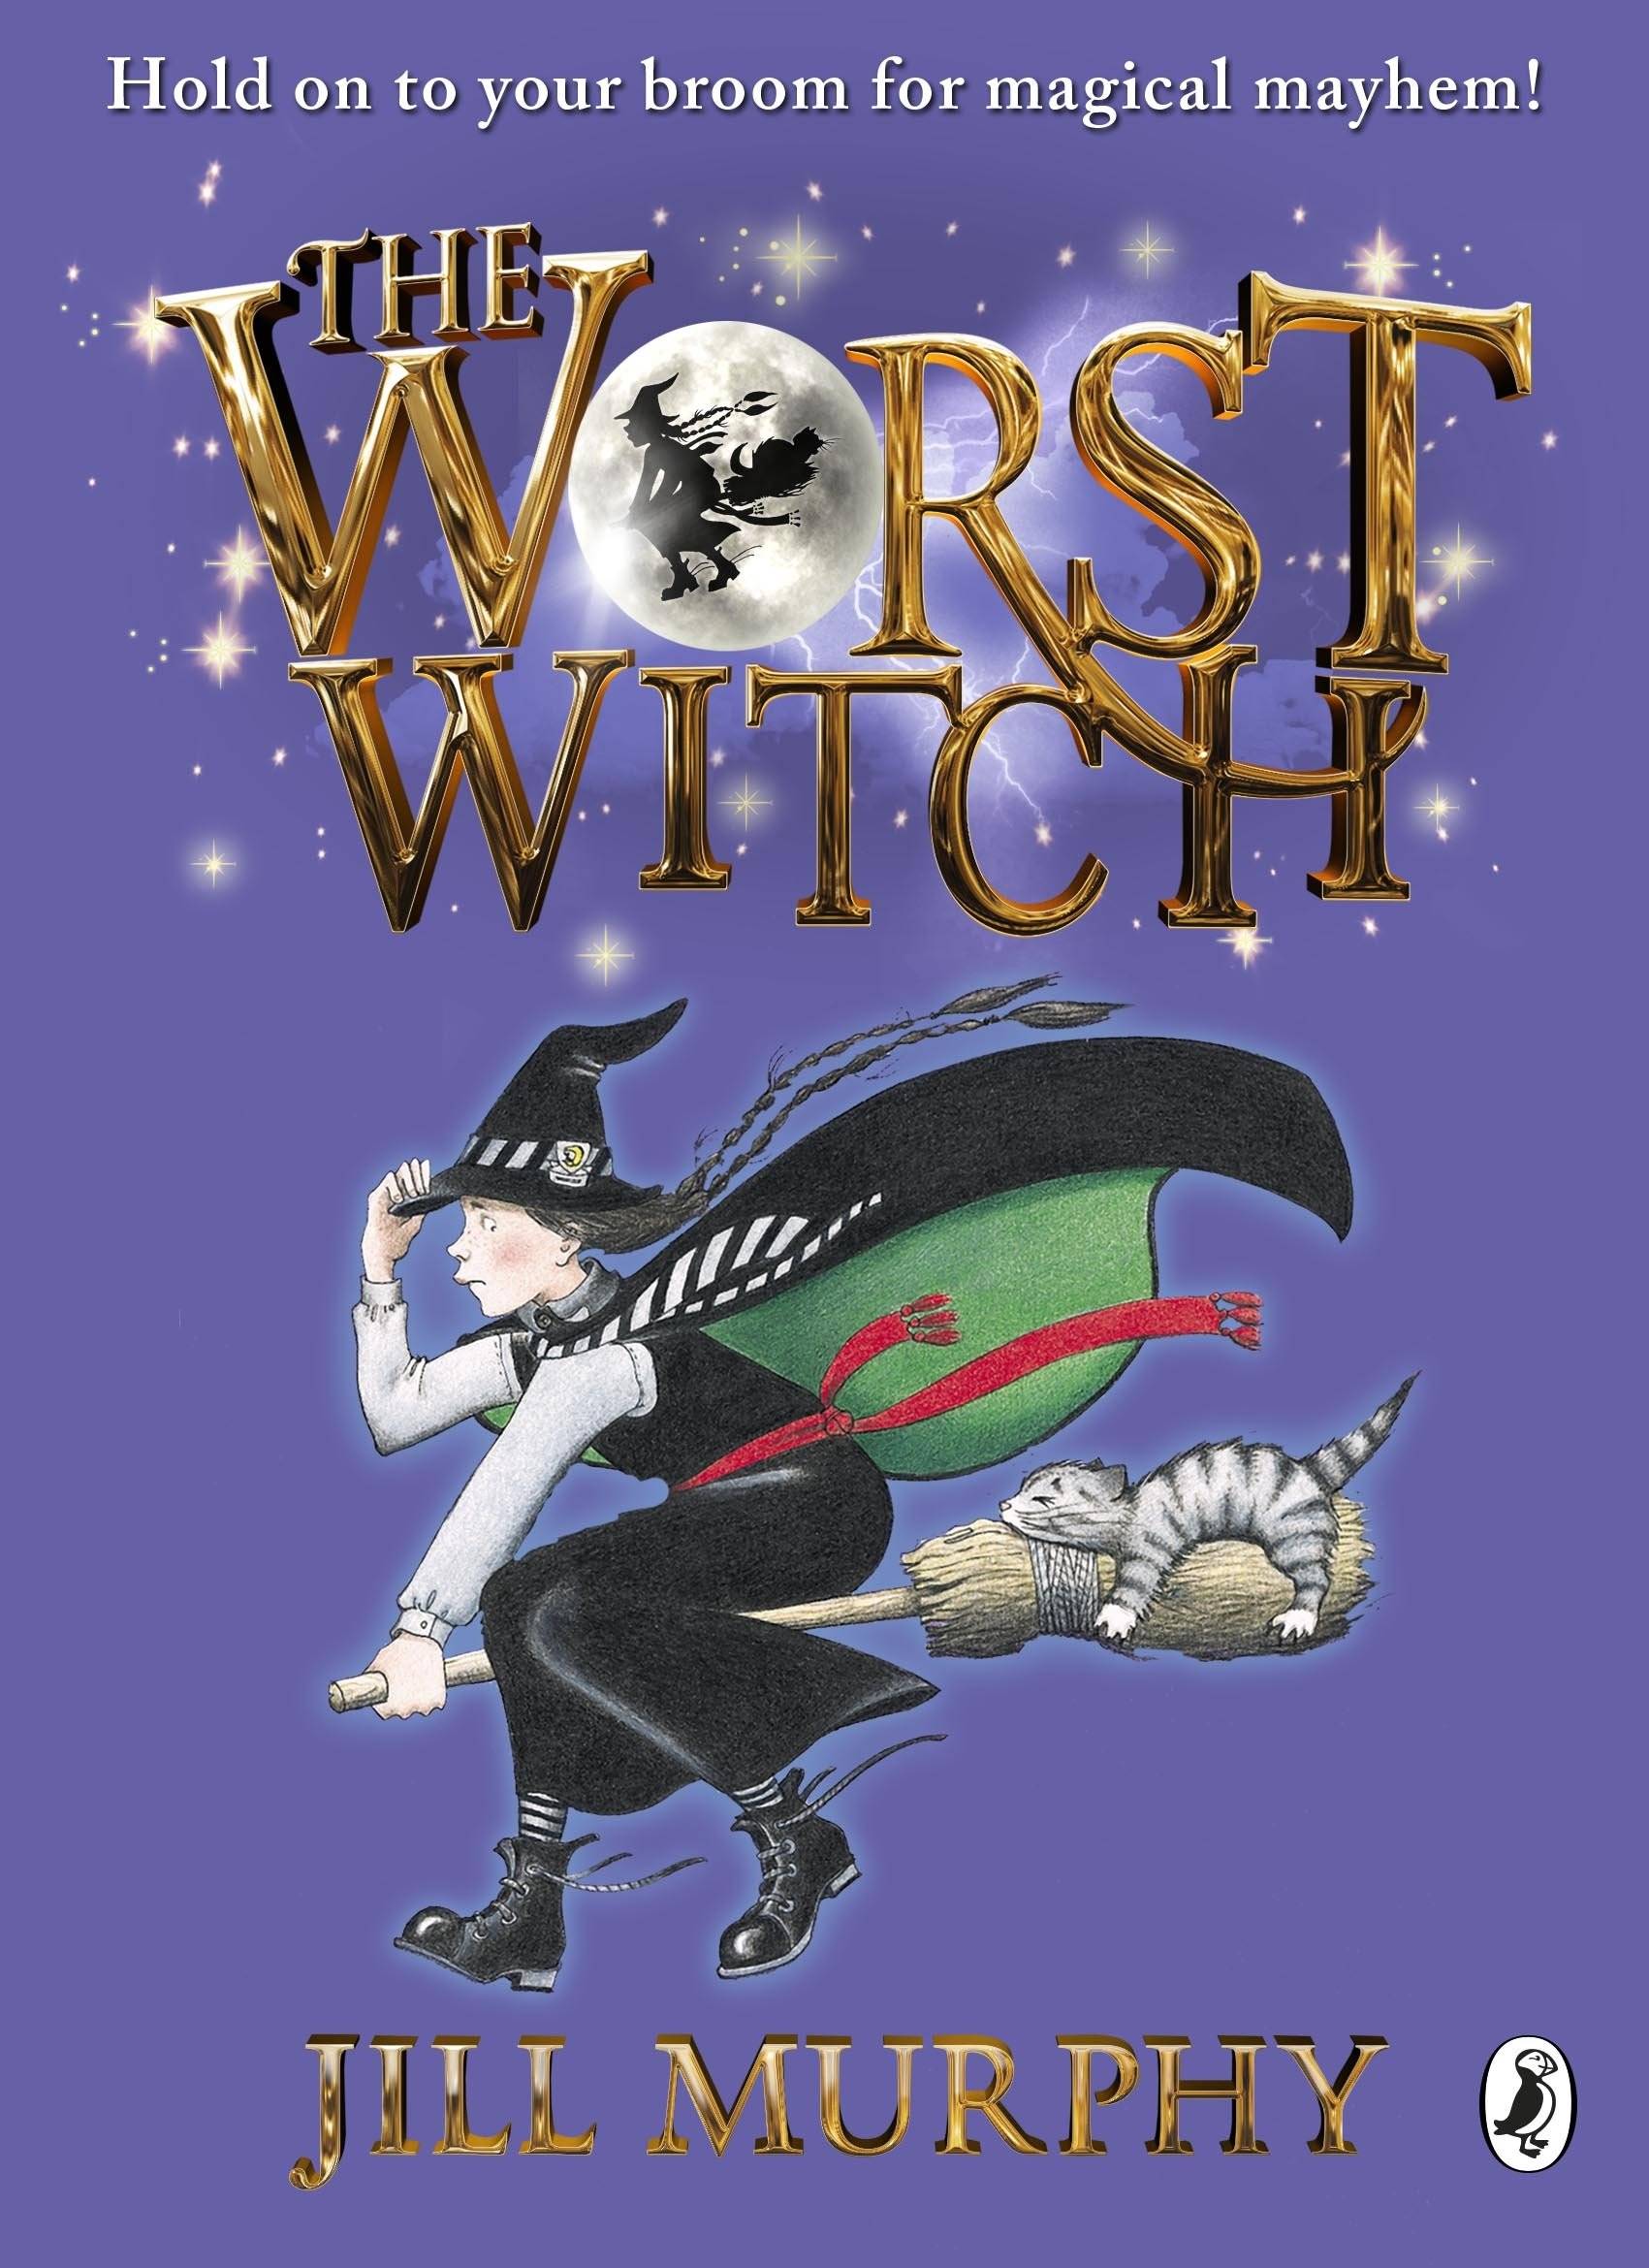 IMG : The Worst Witch